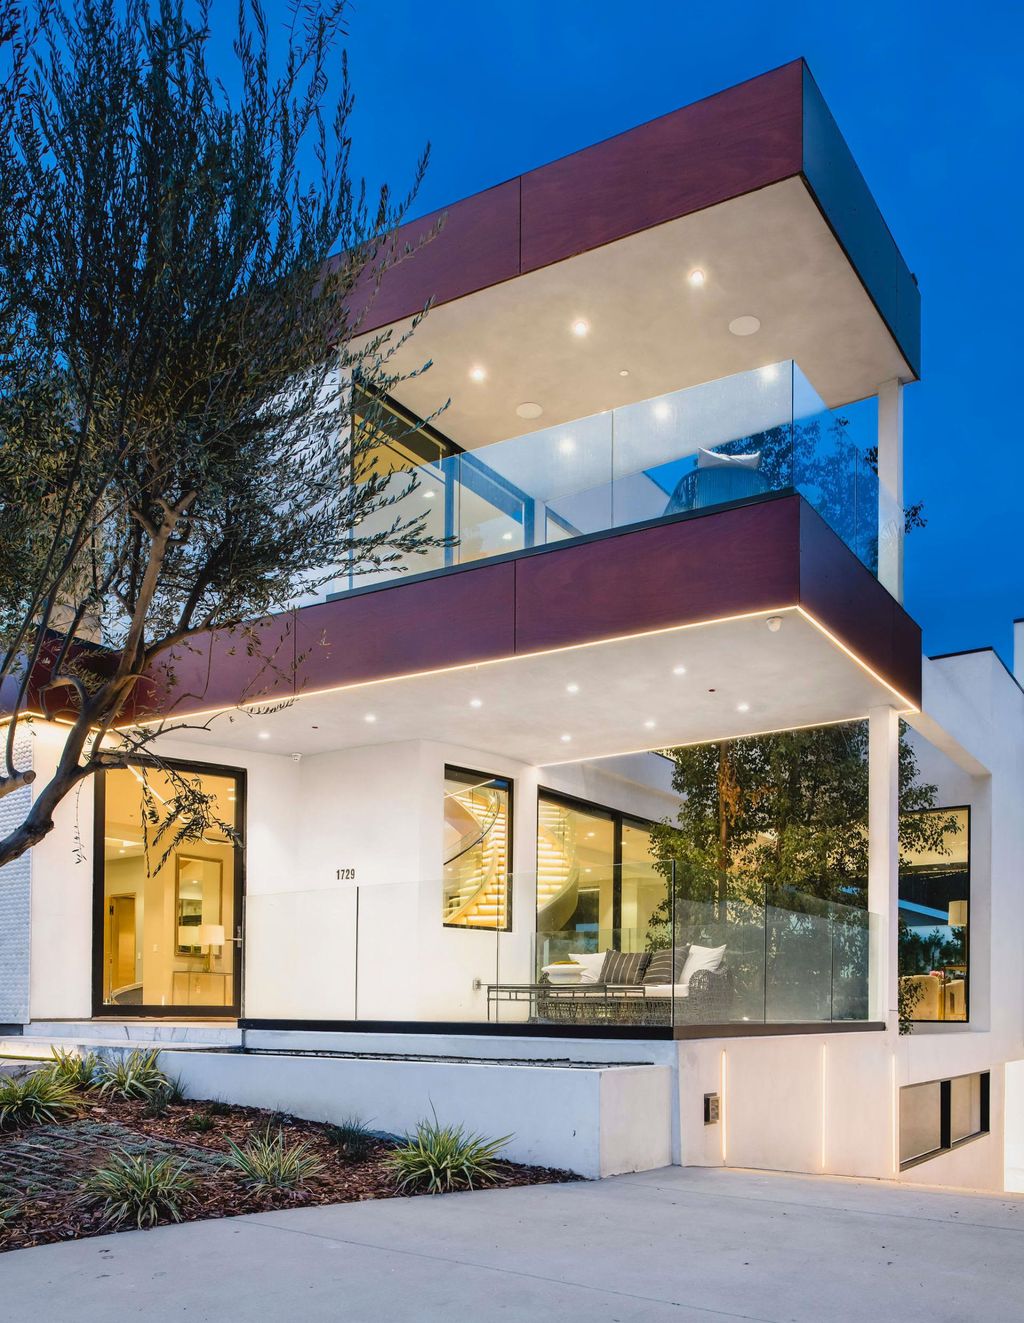 Brand-New-Modern-Home-on-one-of-the-most-Prestigious-Streets-in-Beverly-Hills-hits-Market-for-26900000-24